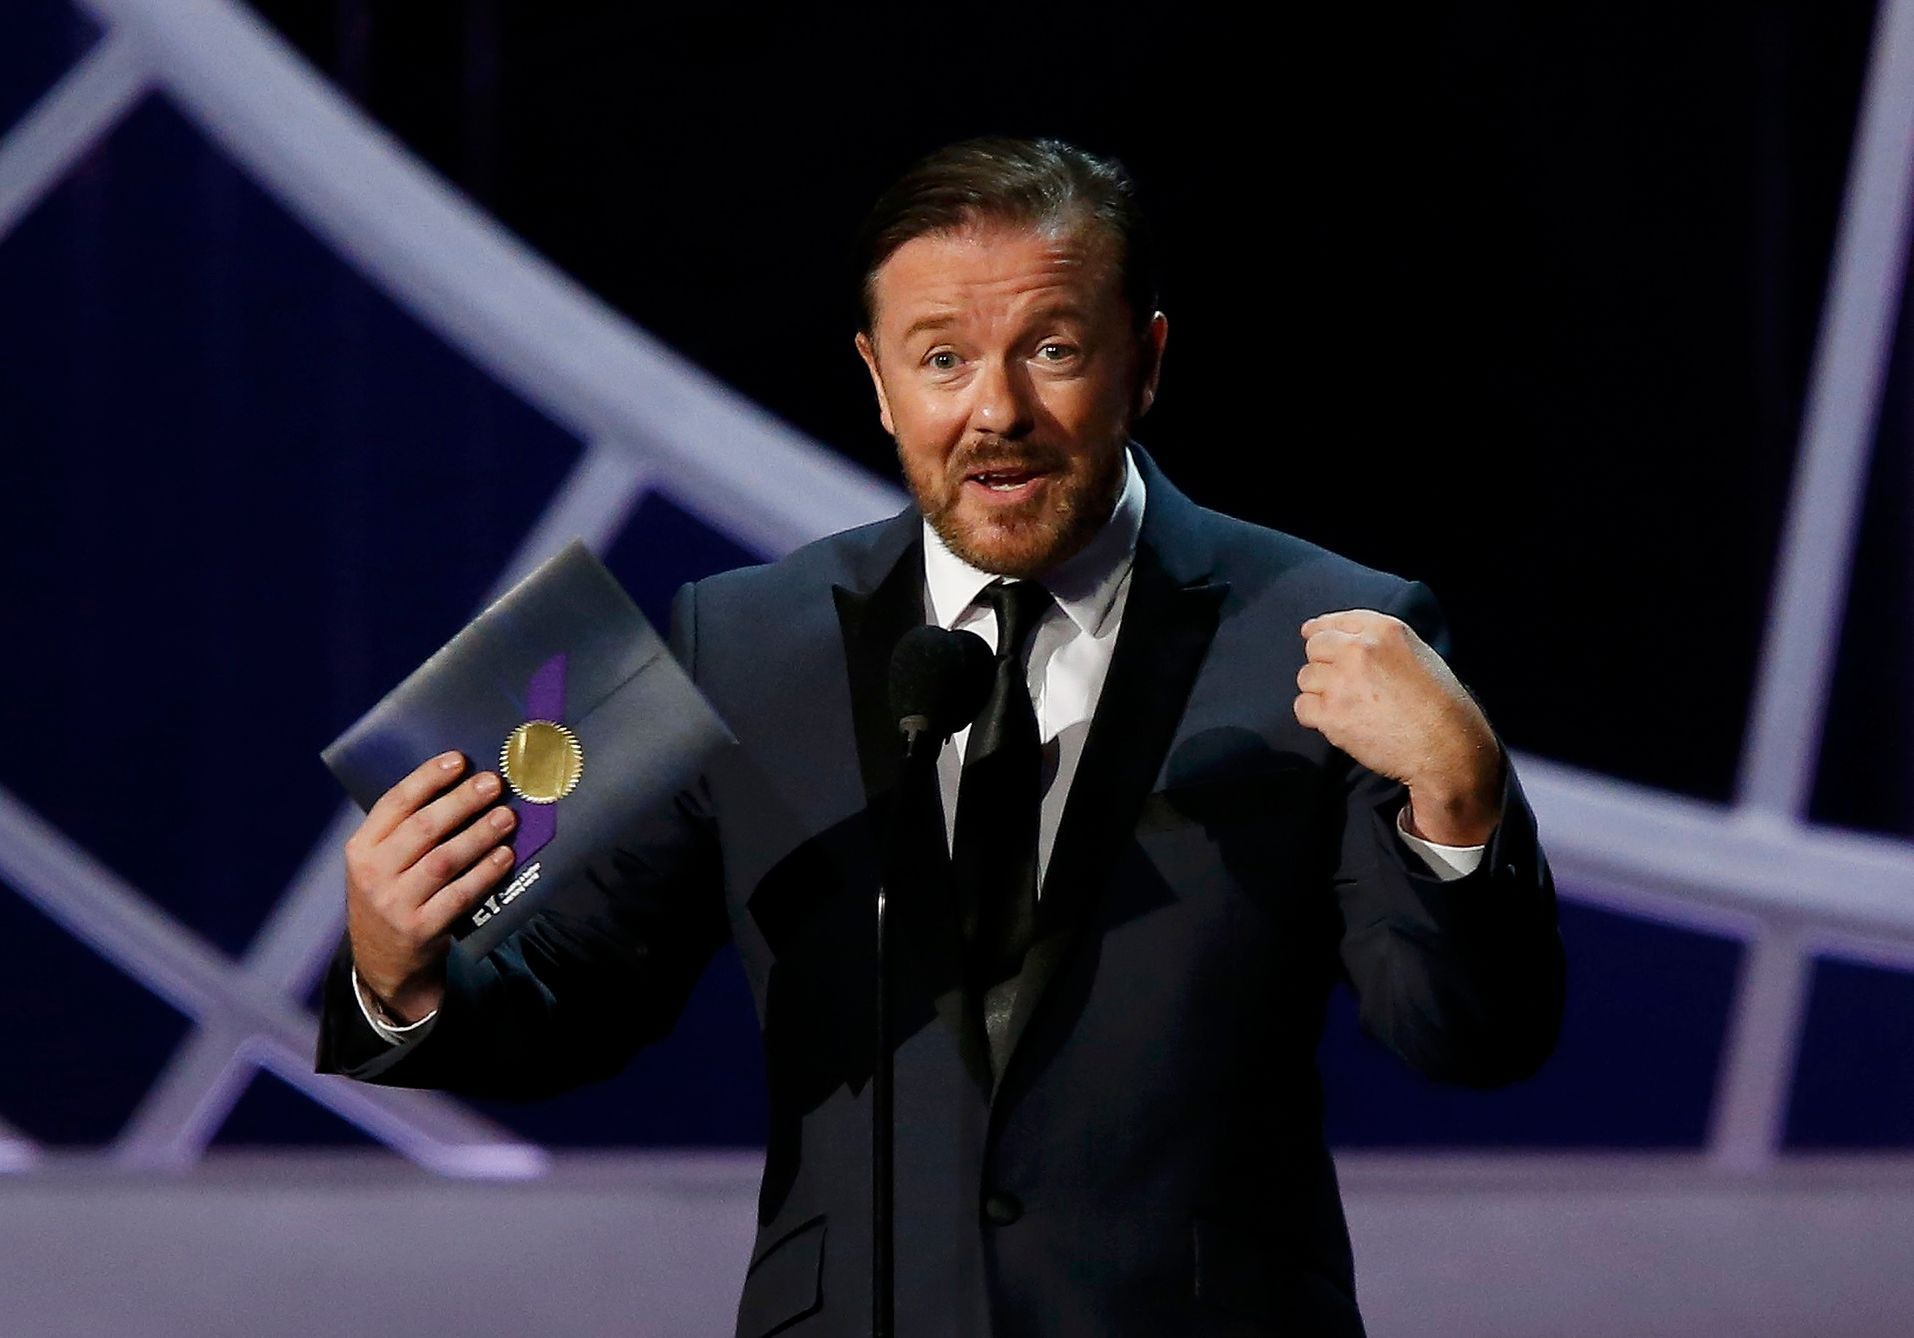 Ricky Gervais presents the award for Outstanding Writing For A Variety Series during the 66th Primetime Emmy Awards in Los Angeles